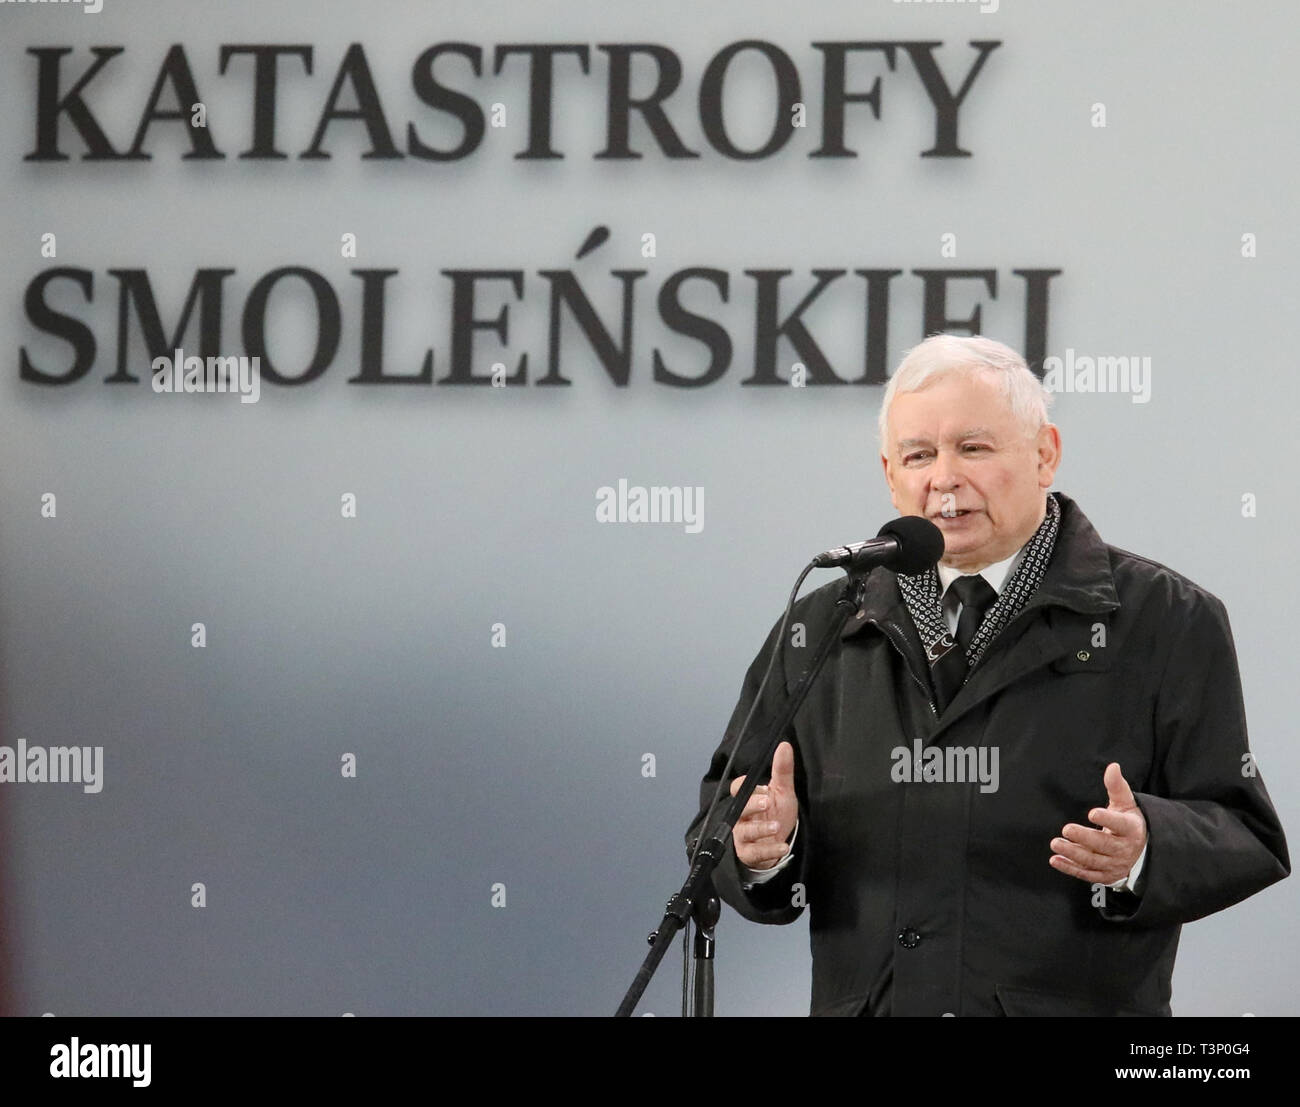 The 9th anniversary of Smolensk air disaster killing 96 people including Poland's First Couple Lech Kaczynski and Maria Kaczynska is held on April 10, 2019 in Warsaw, Poland.   Law and Justice leader Jaroslaw Kaczynski Stock Photo